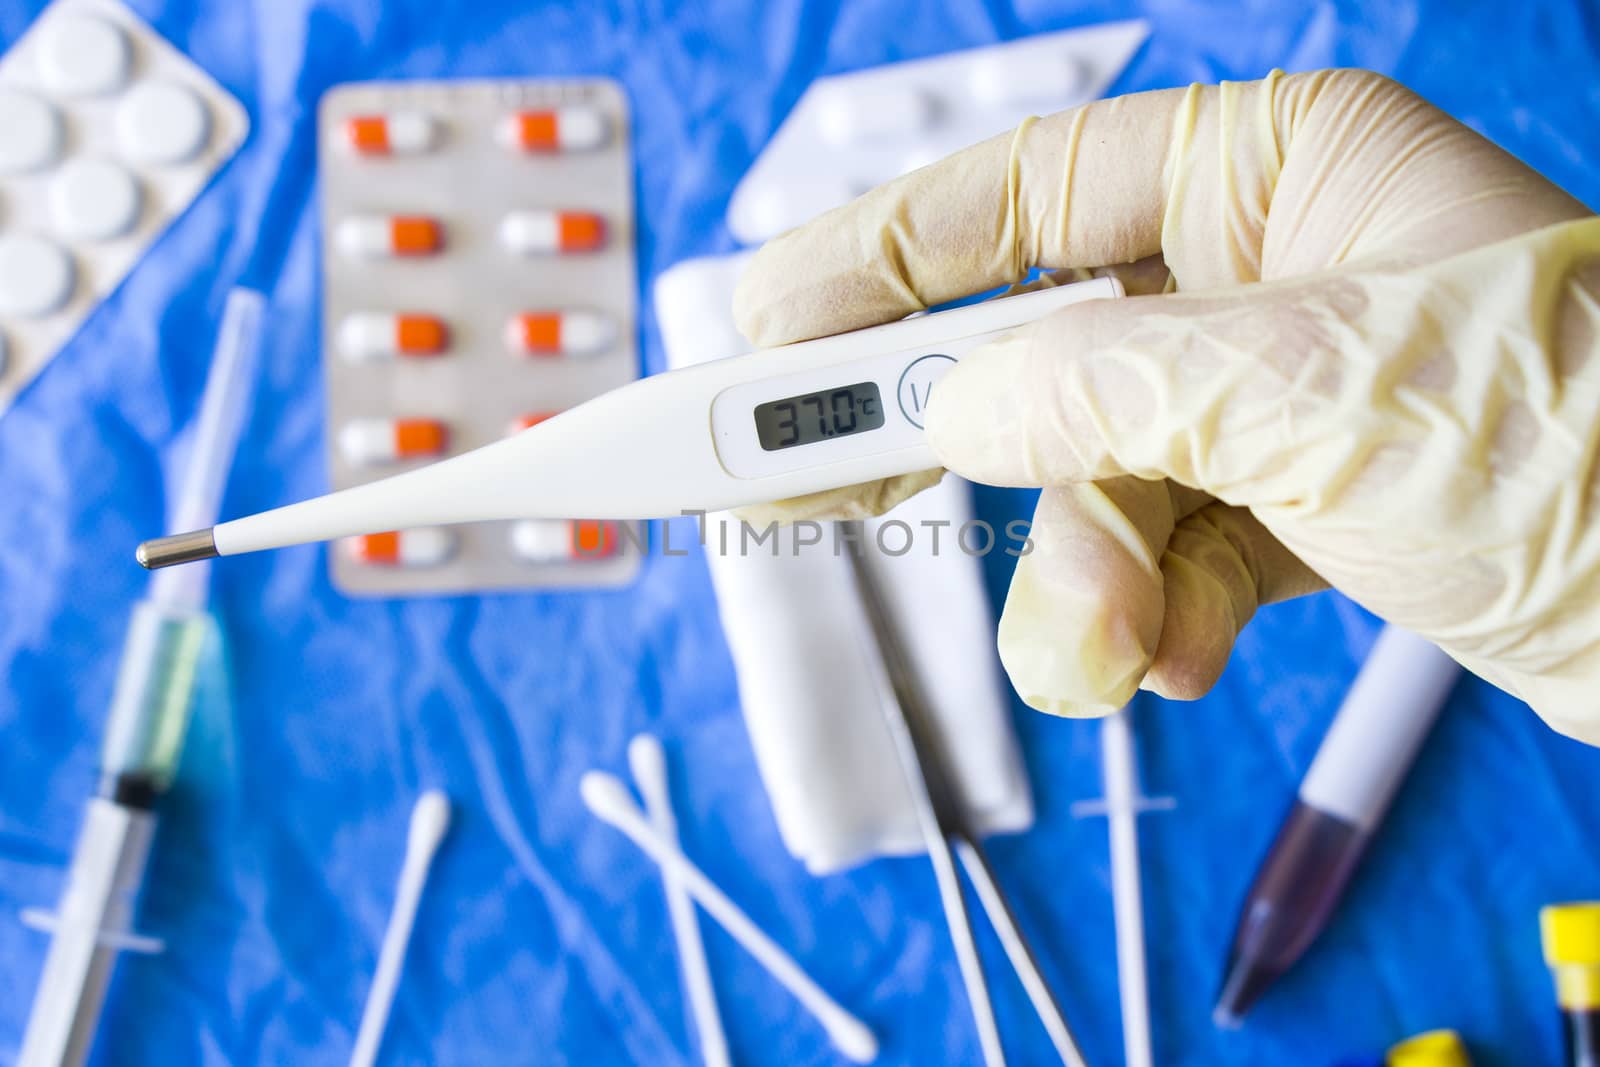 Body thermometer holding in hand, glove and doctors hand, drugs on the background